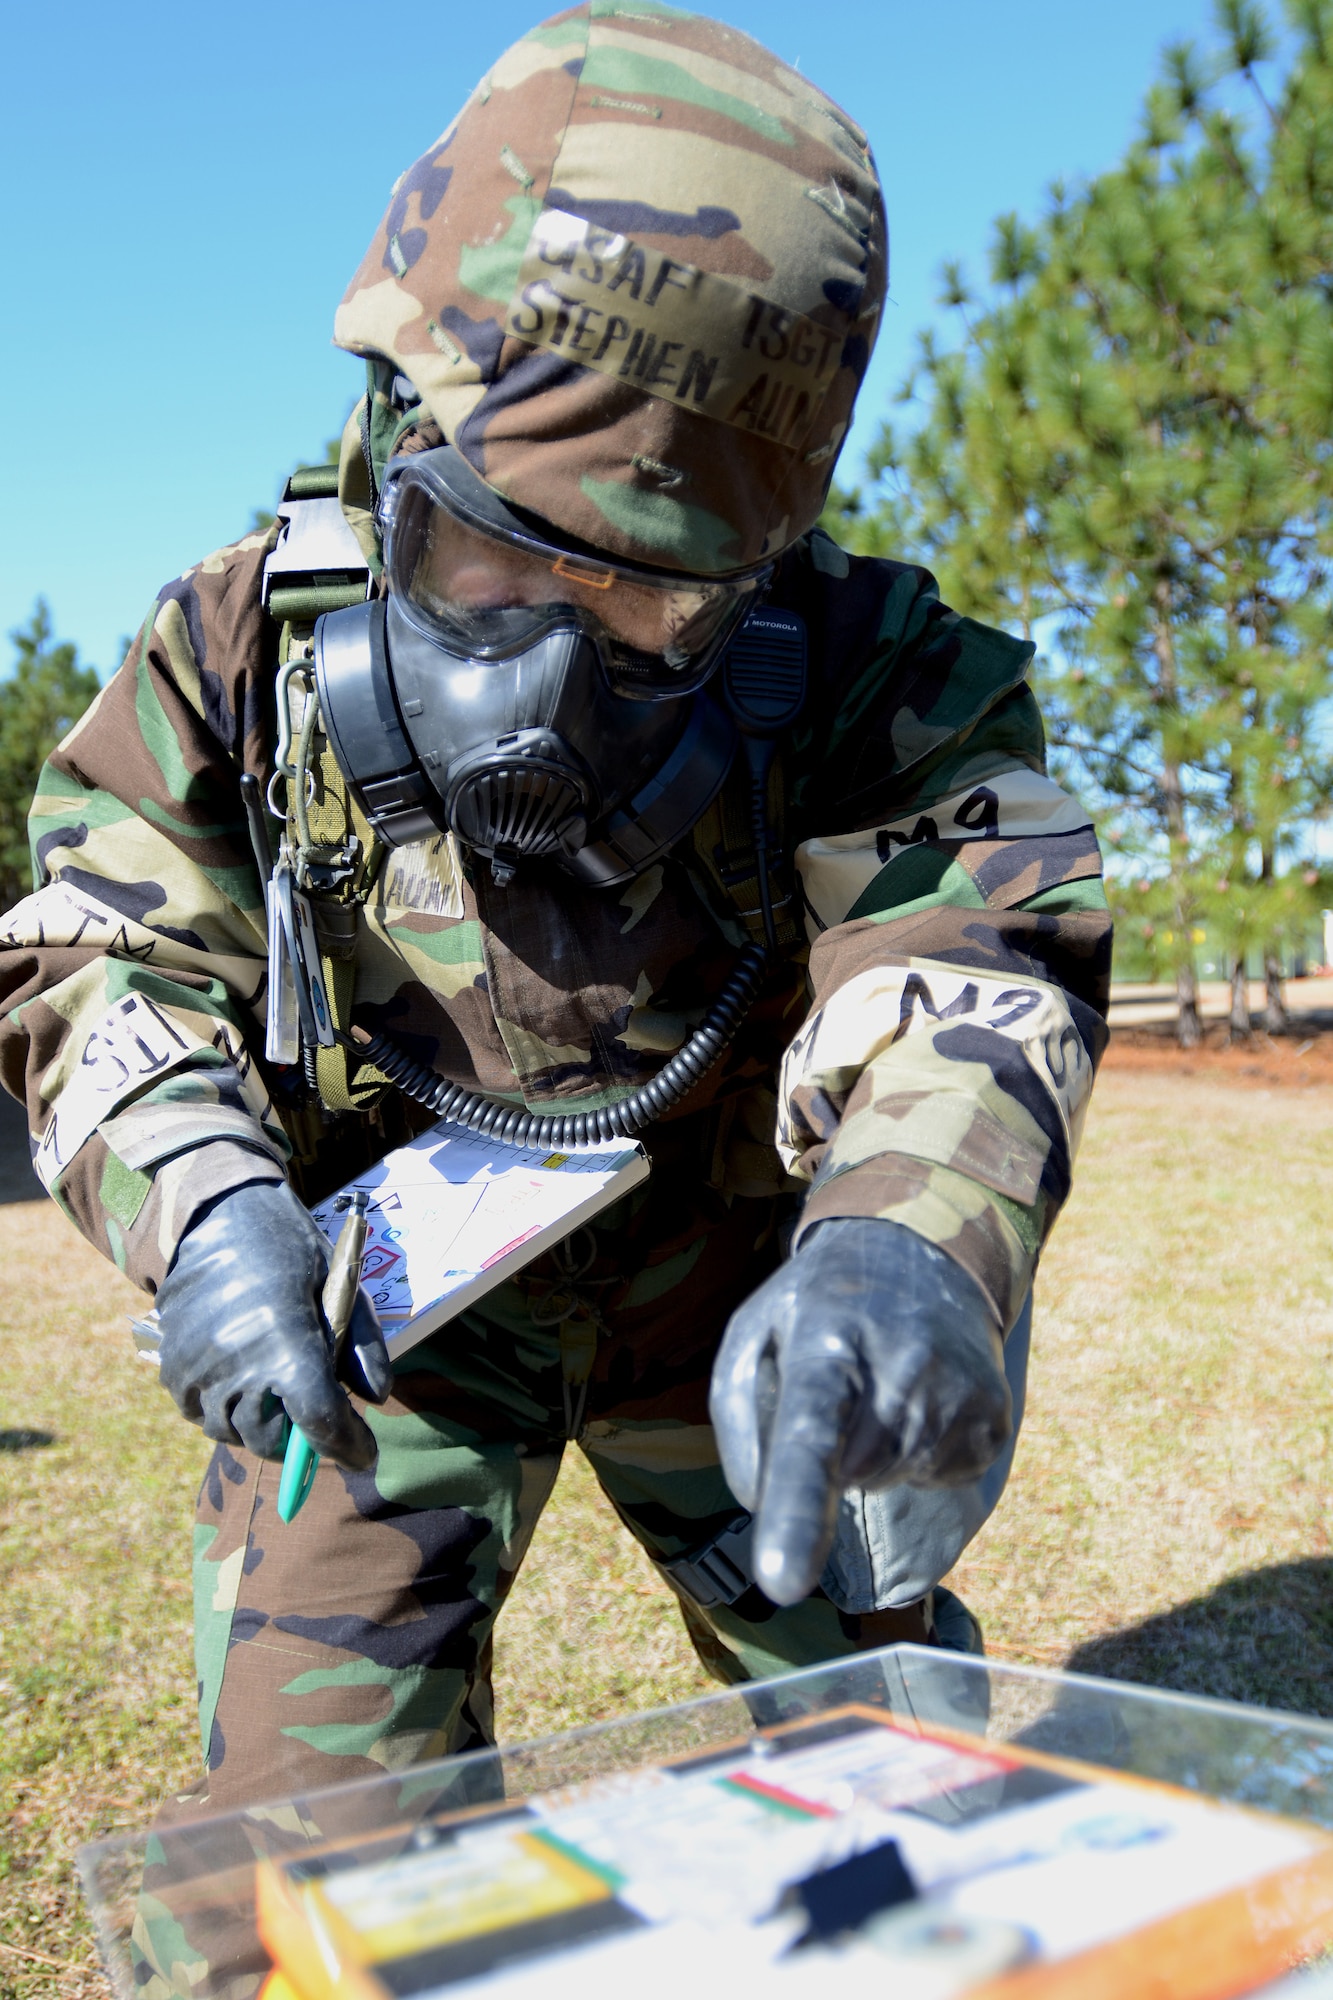 U.S. Air Force Tech. Sgt. Stephen Aun, with the 169th Communications Flight at McEntire Joint National Guard Base, S.C., inspects a chemical contamination stanchion during a post attack reconnaissance (PAR) check, March 15, 2013, after a simulated attack. PAR teams are designated for specific buildings and areas of the base to assess damage and survey the area for casualties, unexploded ordinances and chemical contamination after an attack. Personnel at McEntire are preparing for an upcoming Operational Readiness Inspection, which evaluates a unit's ability to operate and launch missions in a chemical combat environment.
(National Guard photo by Tech. Sgt. Caycee Watson/Released)
